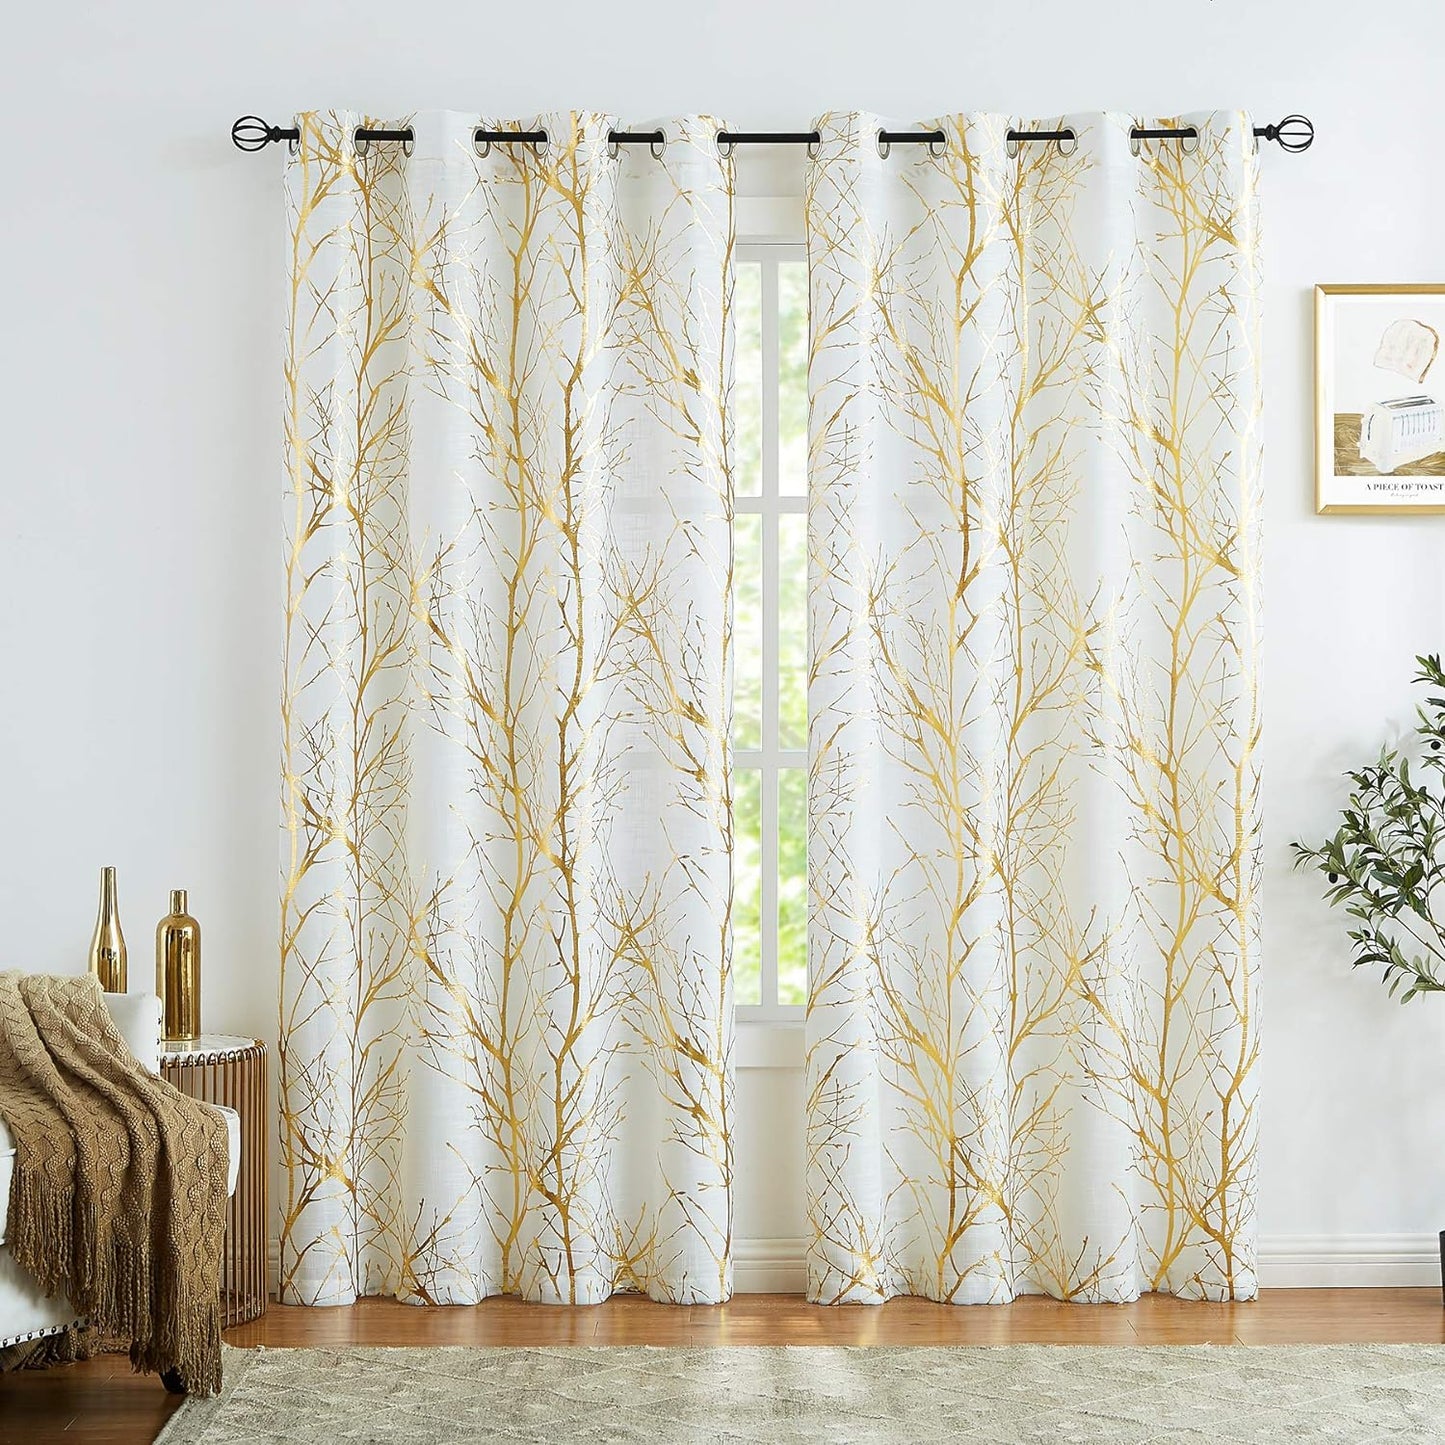 FMFUNCTEX Blue White Curtains for Kitchen Living Room 72“ Grey Tree Branches Print Curtain Set for Small Windows Linen Textured Semi-Sheer Drapes for Bedroom Grommet Top, 2 Panels  Fmfunctex Semi-Sheer: White + Foil Gold 50" X 96" |2Pcs 